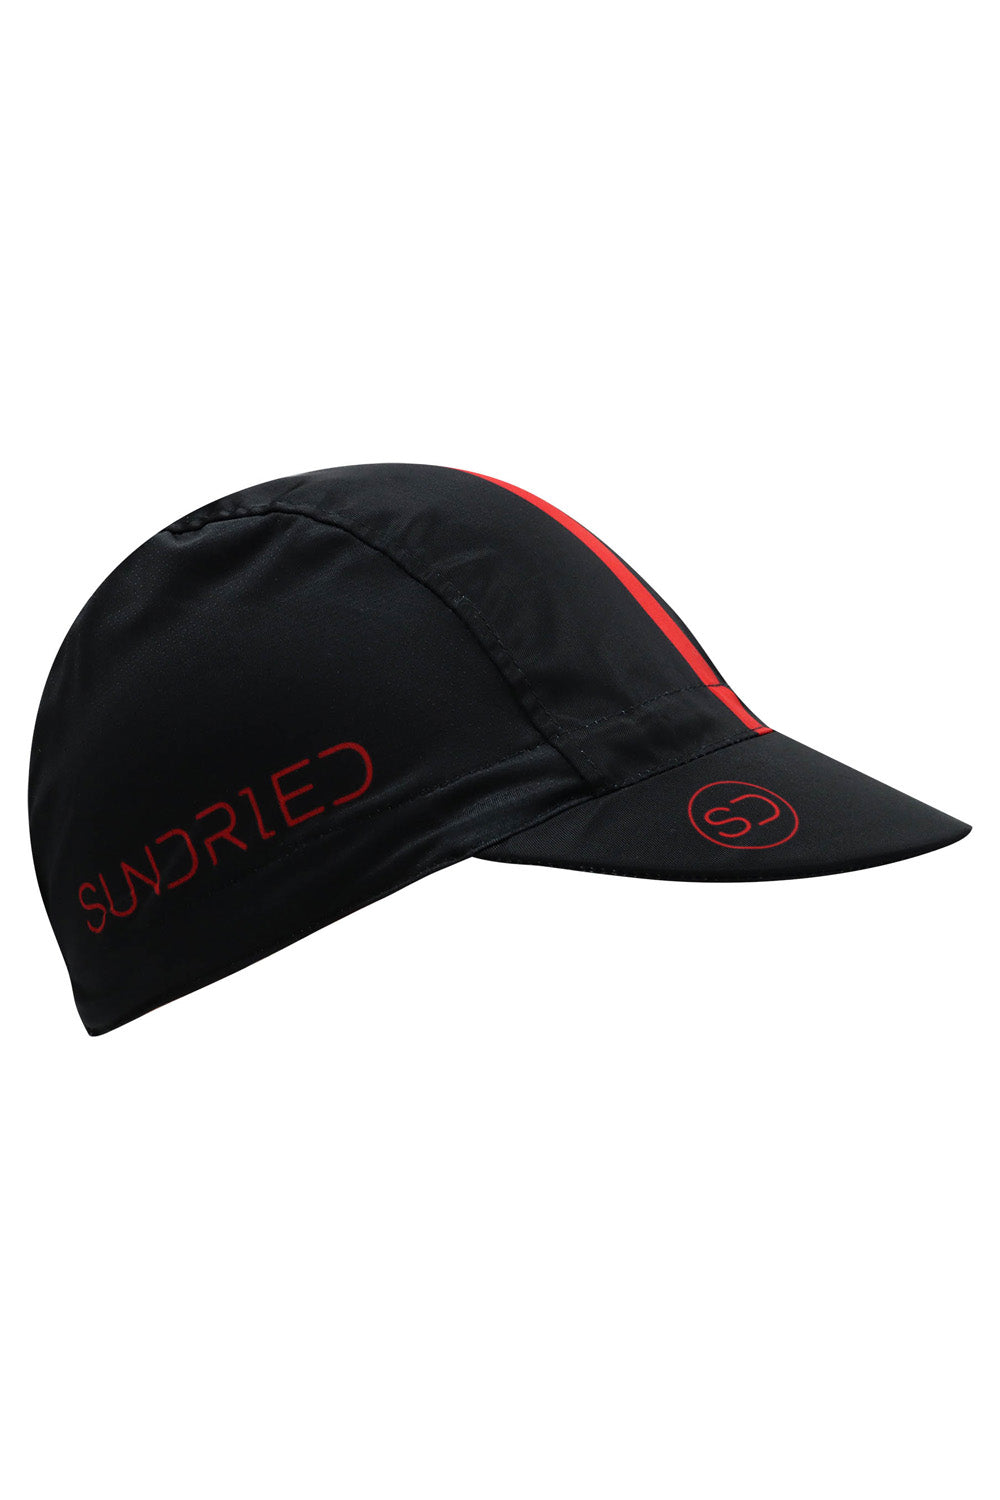 Sundried Stripe Cycle Cap Hats Activewear